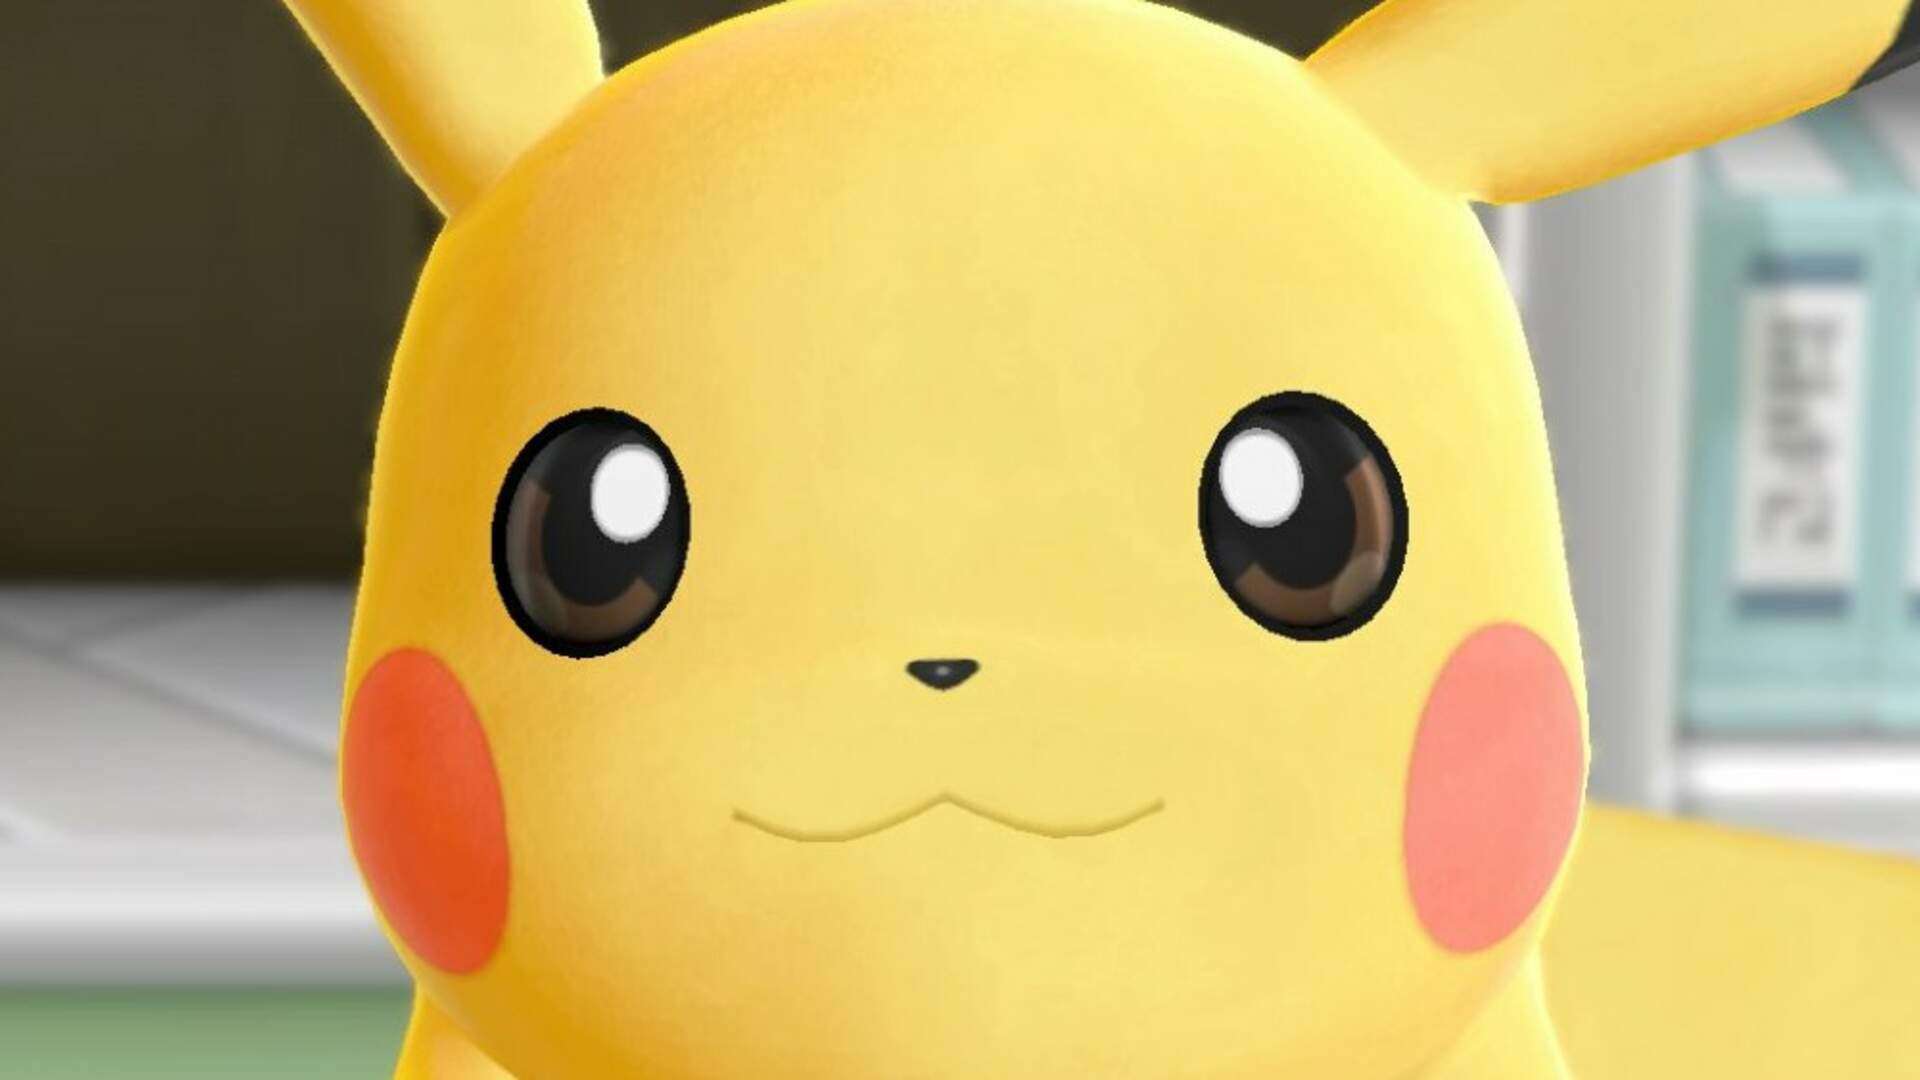 What level does Pikachu evolve at? - Quora